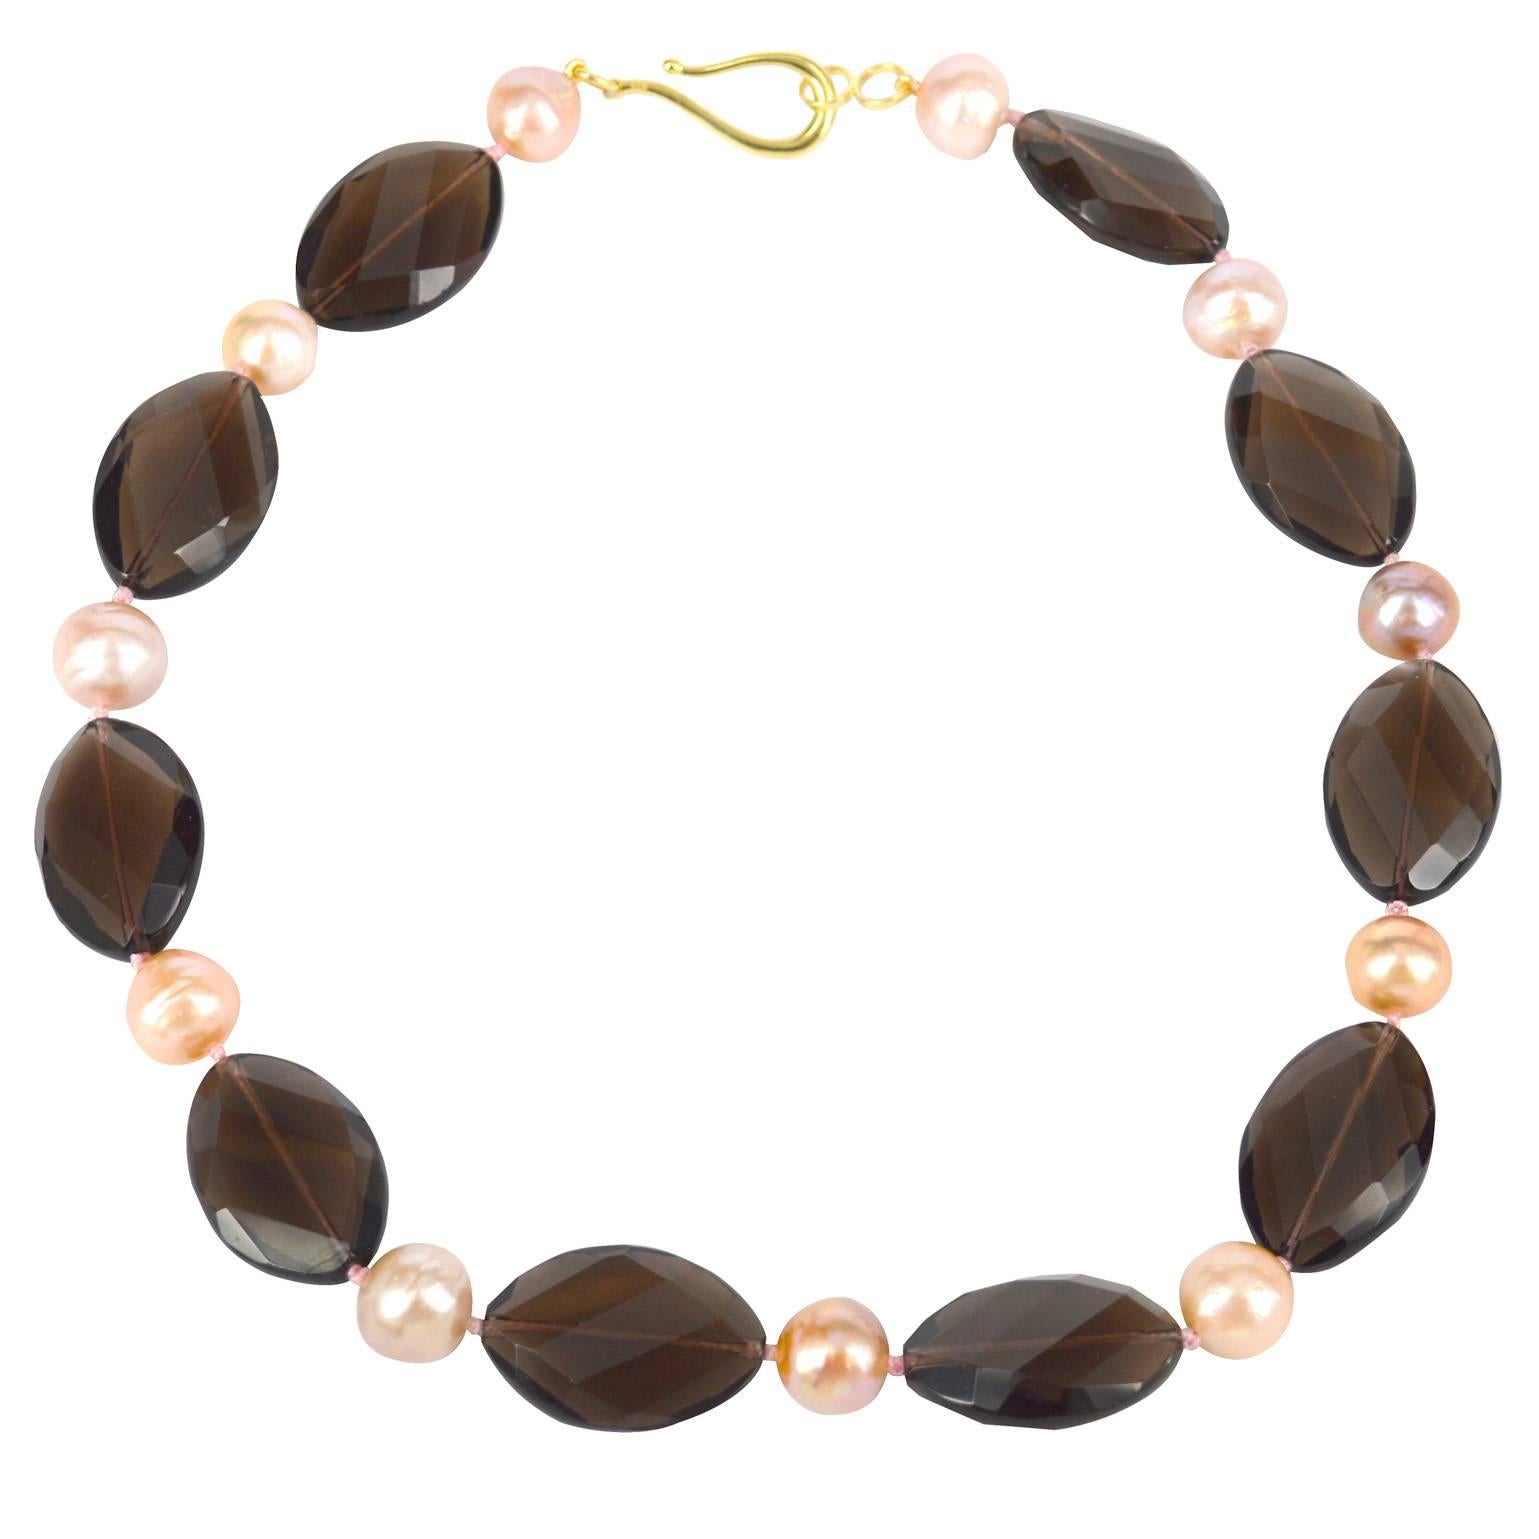 20x30mm unusual shaped faceted Smokey Quartz and naturally Pink Baroque 12-13mm Fresh Water Pearls and a easy to use 29mm Gold Plate Sterling Silver hook Clasp. Finished necklace measures 51cm.

Faceted oval 30x20mm Smokey Quartz with natural